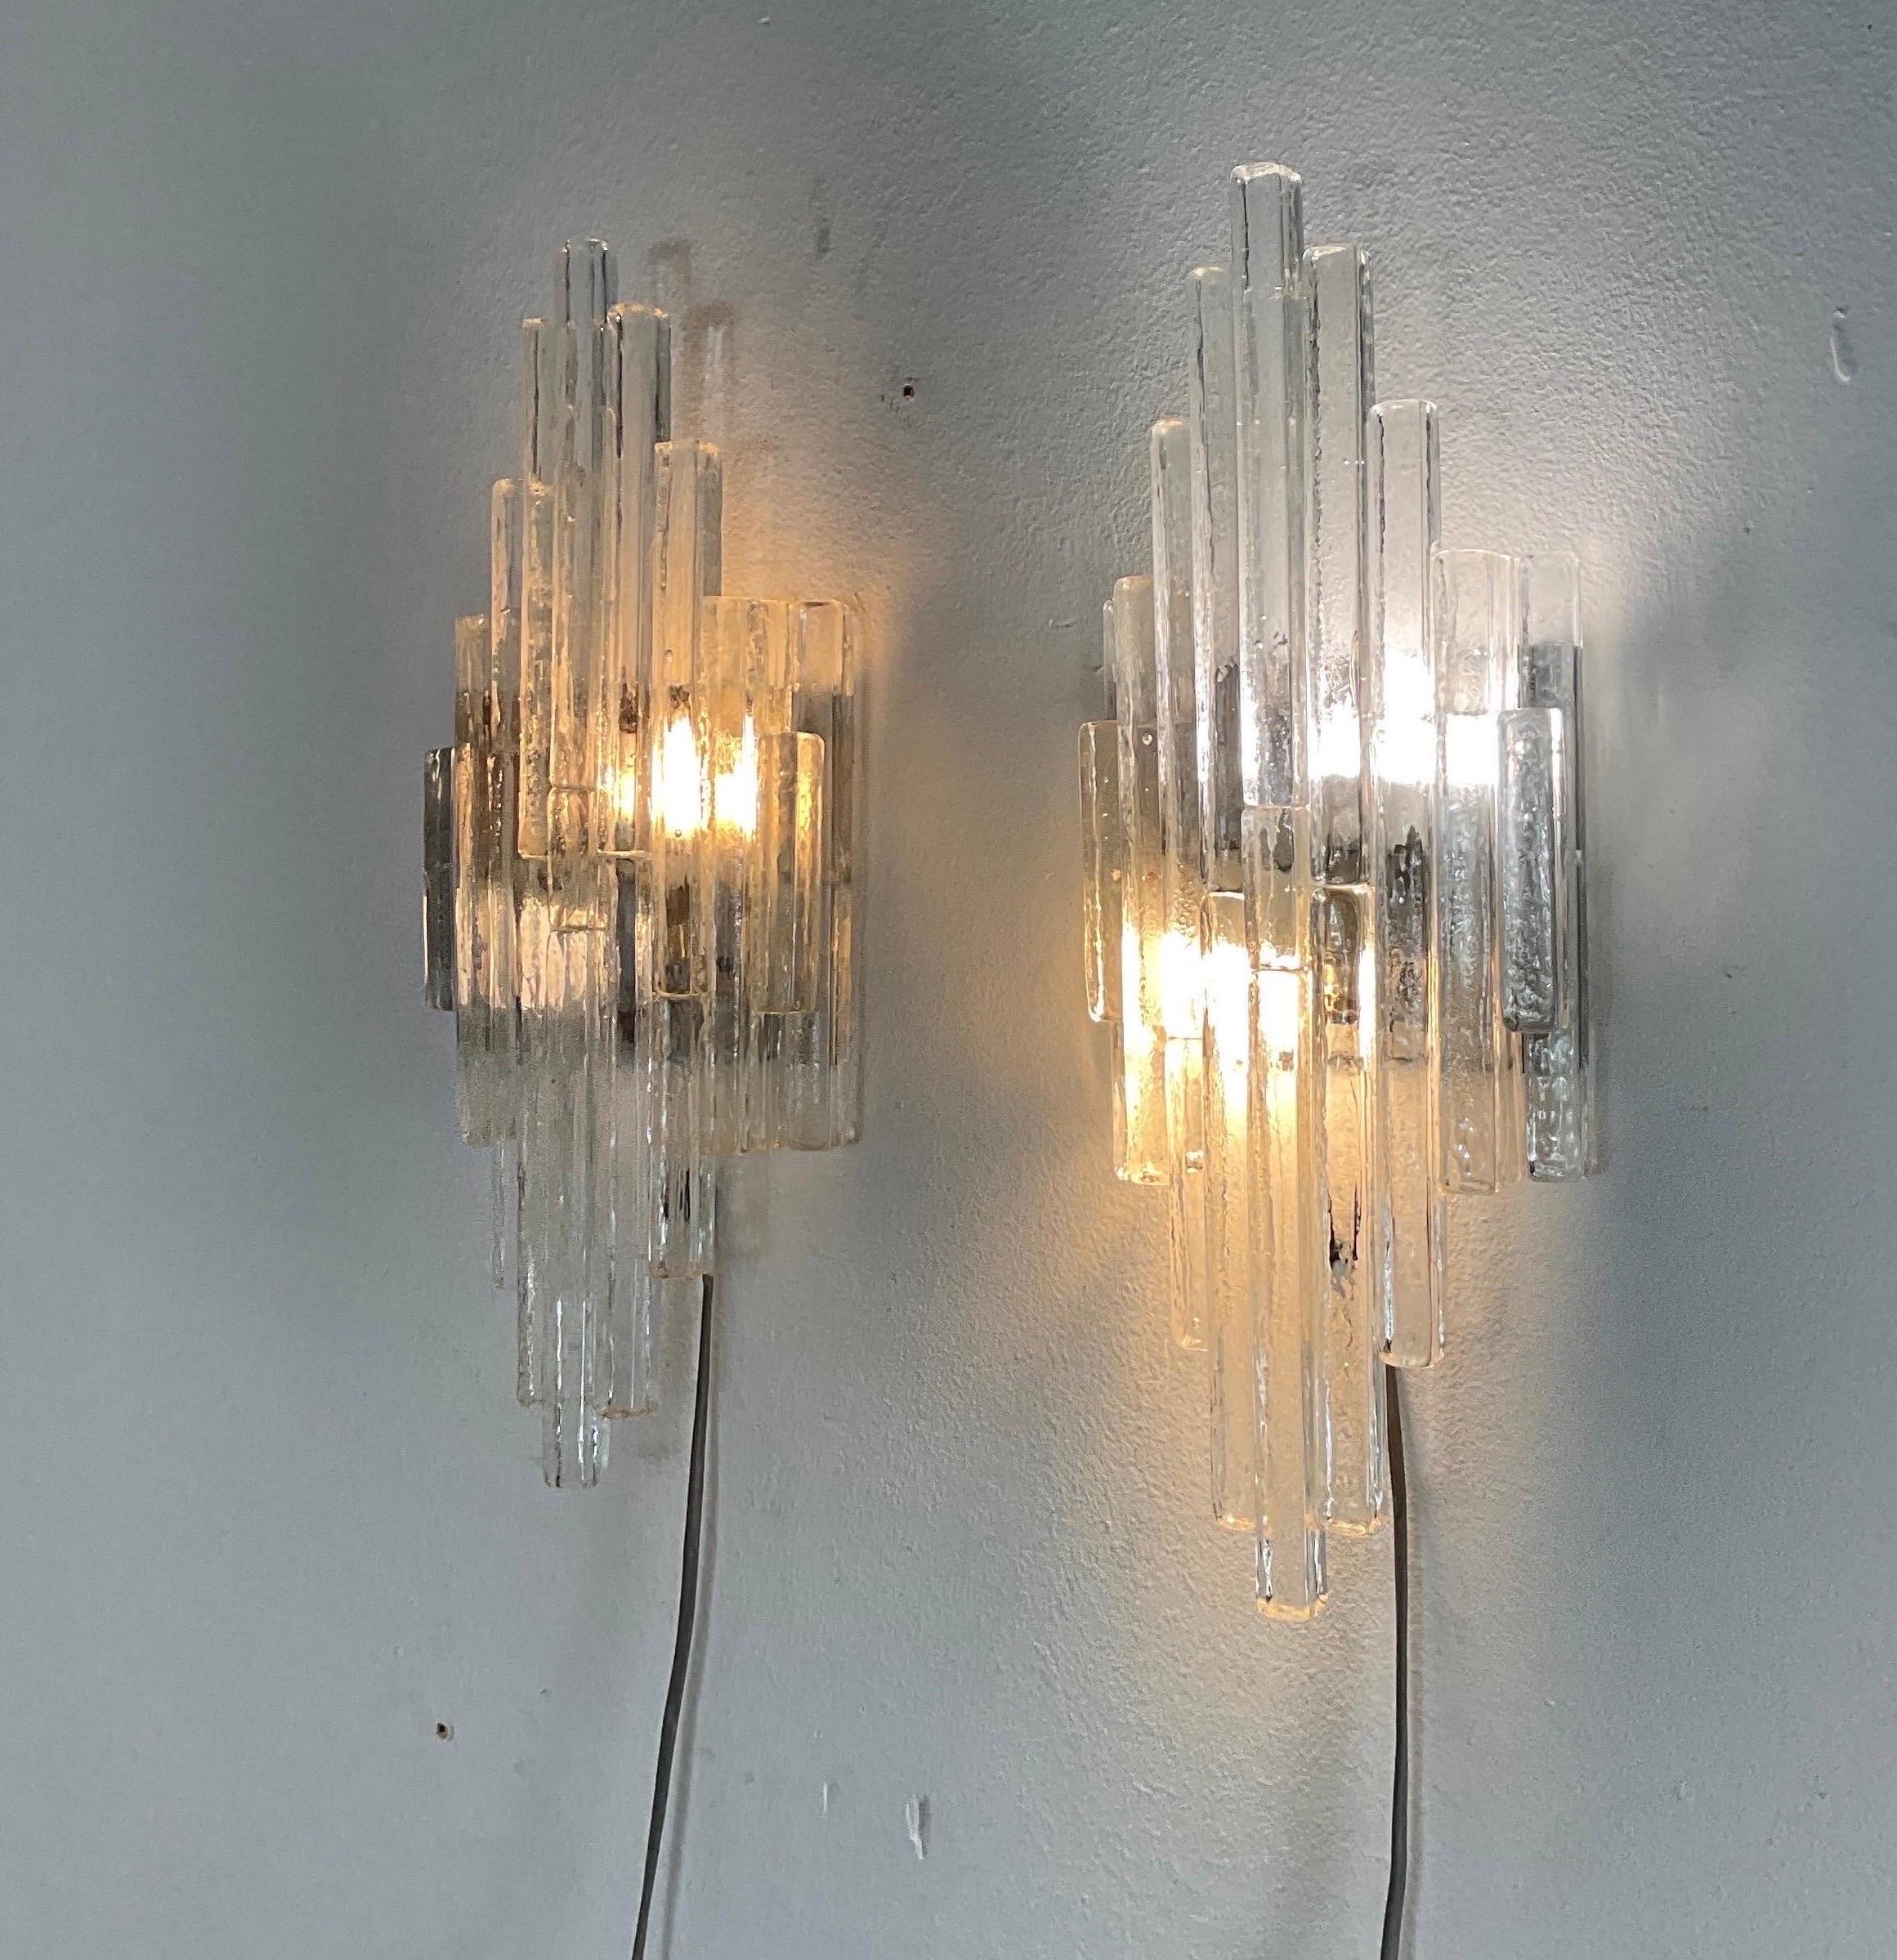 Linea' series wall lamps, Poliarte Production, Verona, '70s. Transparent raw crystal wall lamp, satin stainless steel backing, elongated in shape, two lights,H cm 49x18x10 (wear) Bibliography: Poliarte Catalogue, 1974.